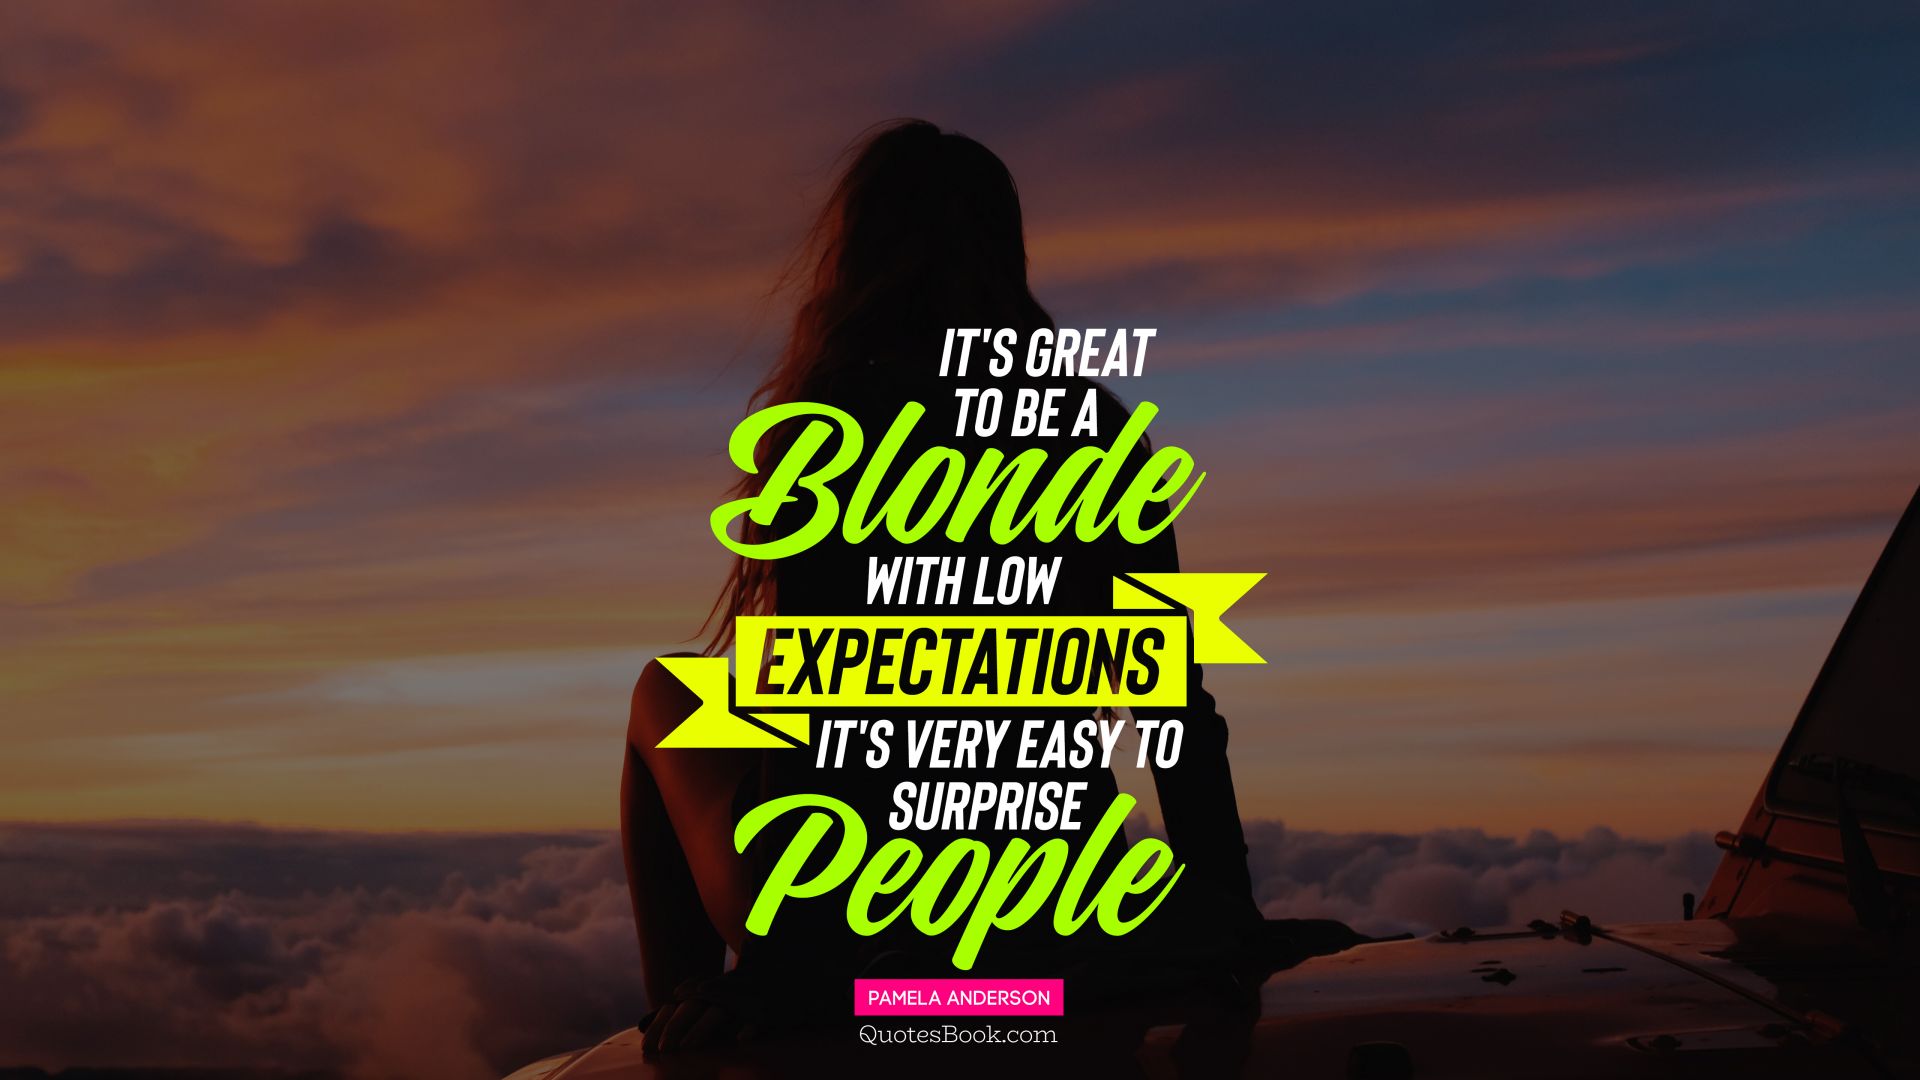 It's great to be a blonde with low expectations it's very easy to surprise people. - Quote by Pamela Anderson